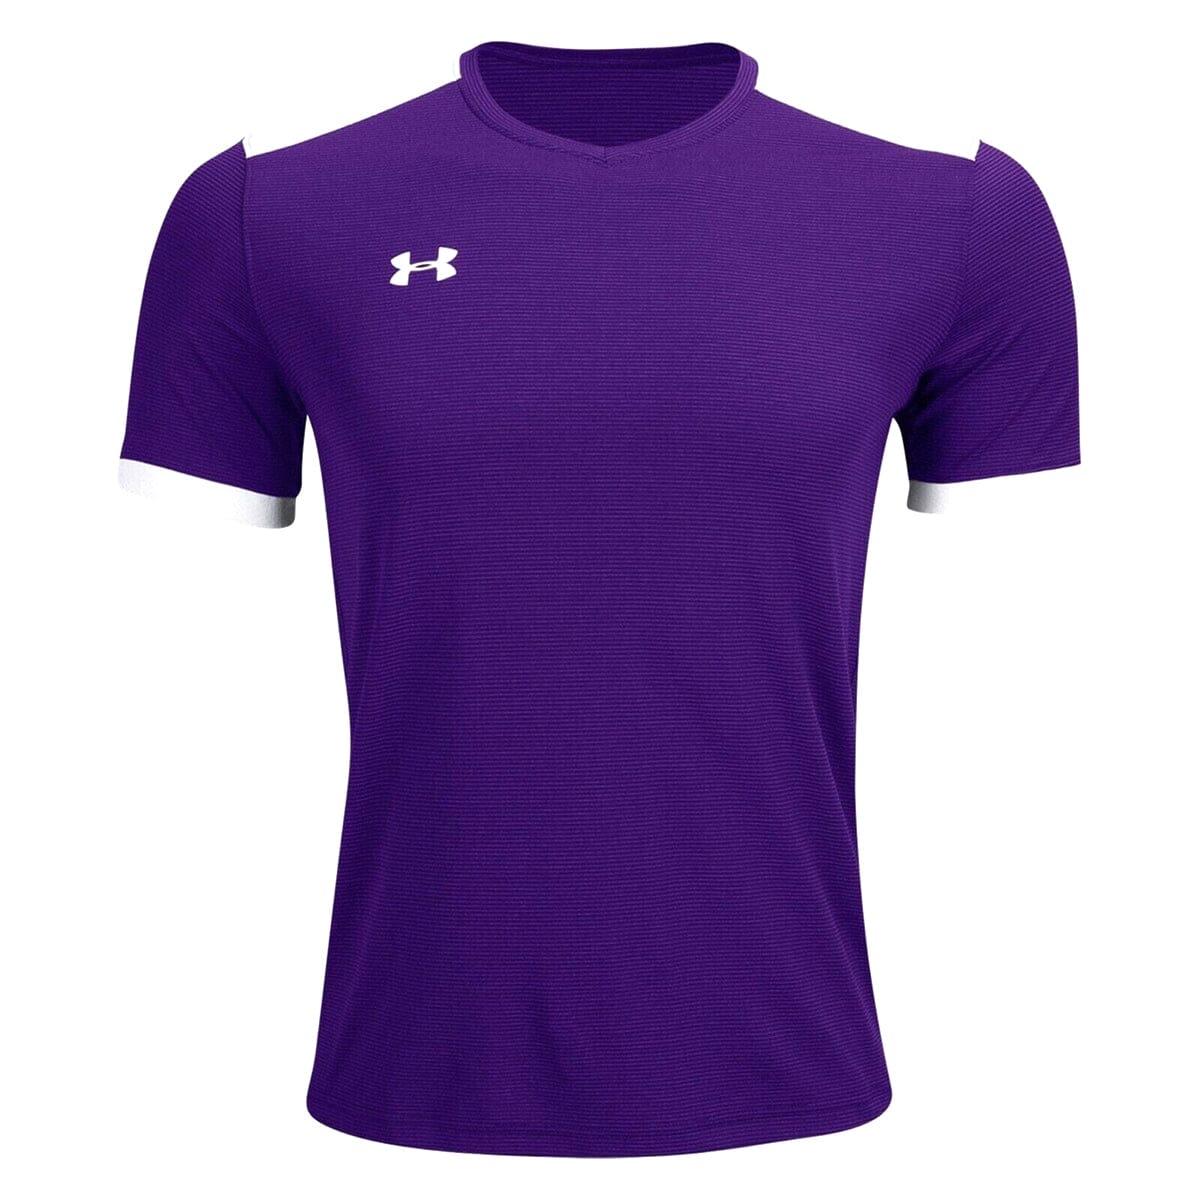 Under Armour Fixture Youth Soccer Jersey - Purple Jersey Under Armour Youth Small Purple 